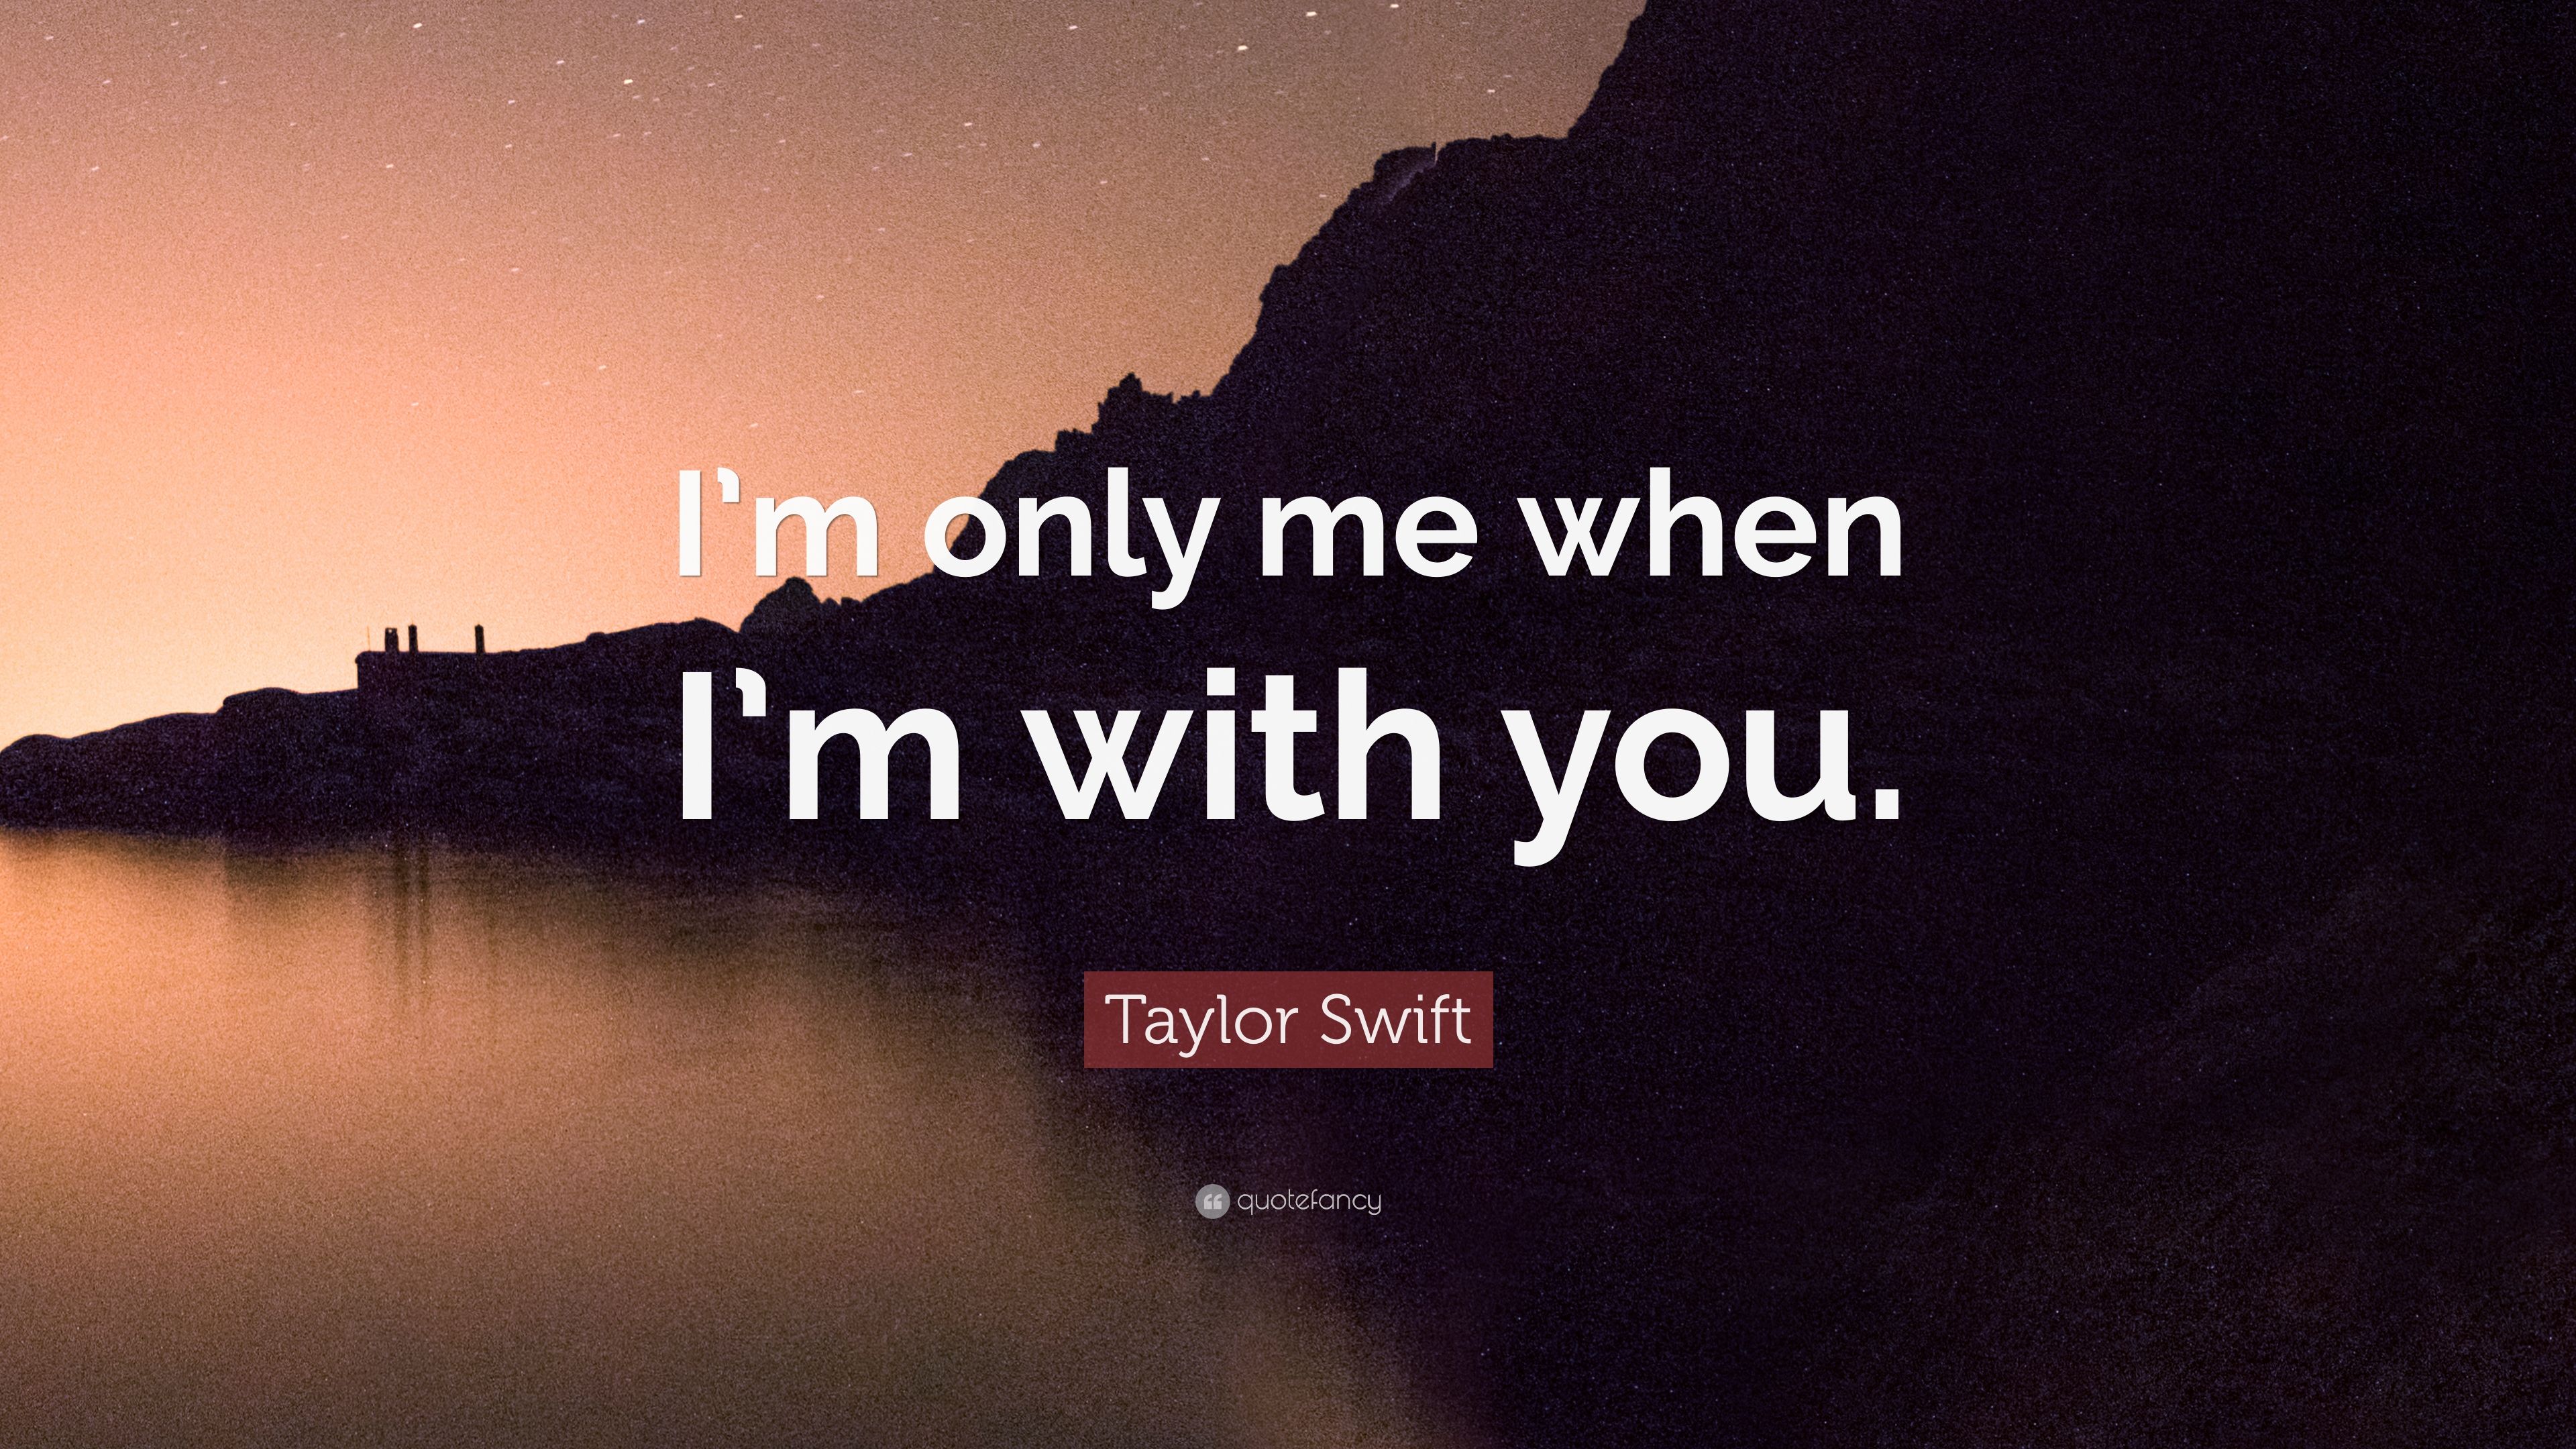 Taylor Swift Quote: “I'm only me when I'm with you.” (12 wallpapers ...